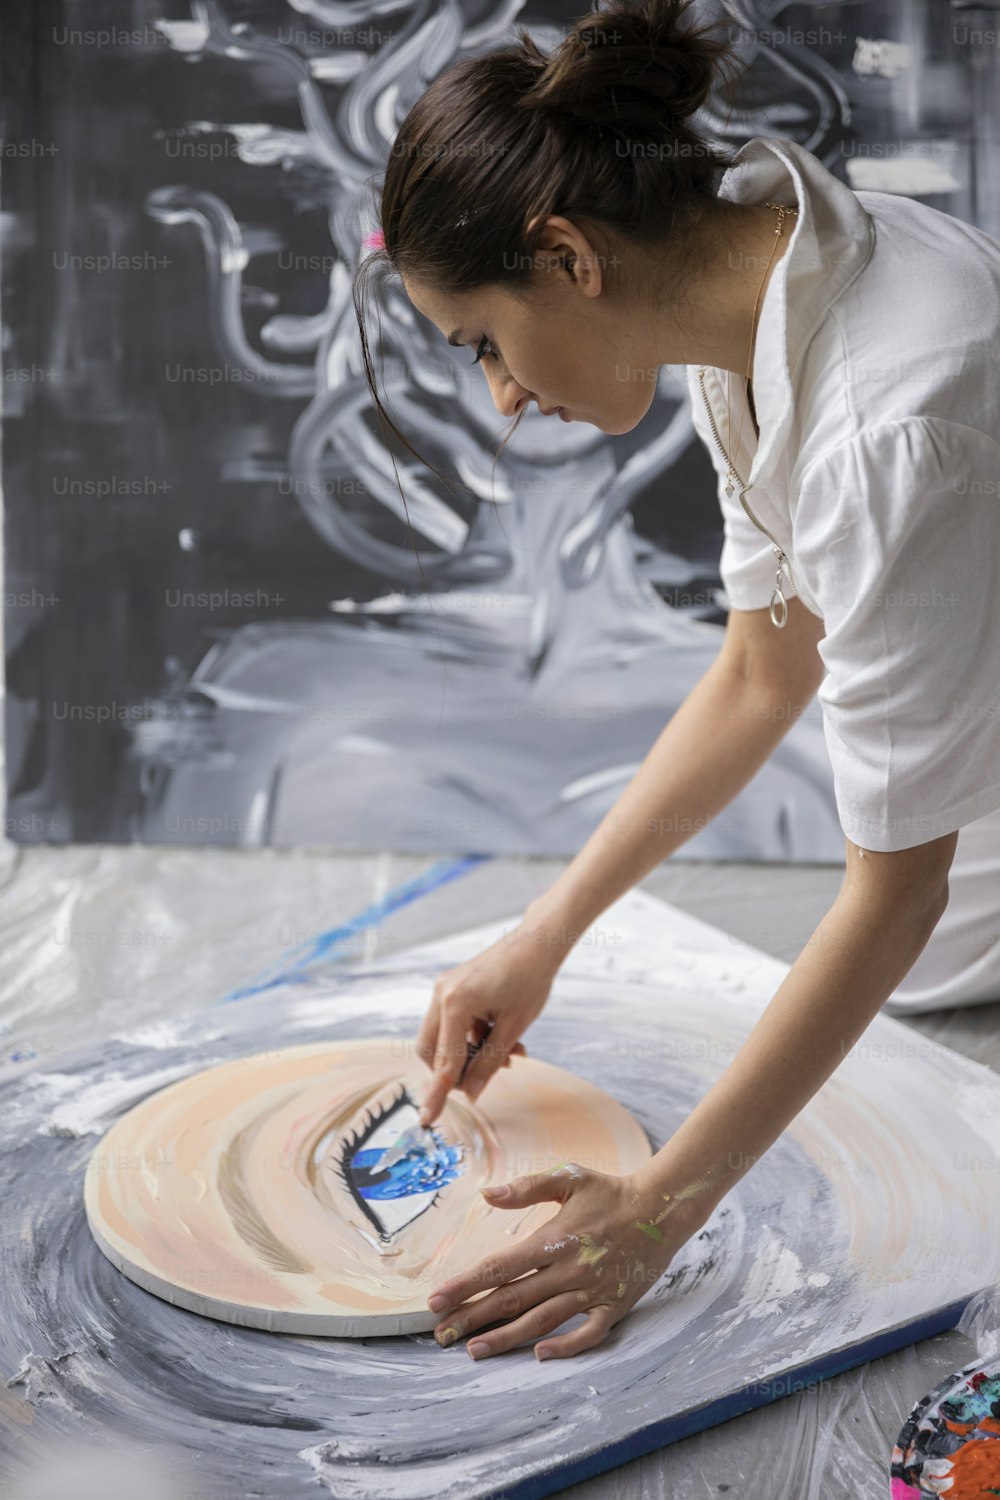 a woman in a white shirt is working on a piece of art